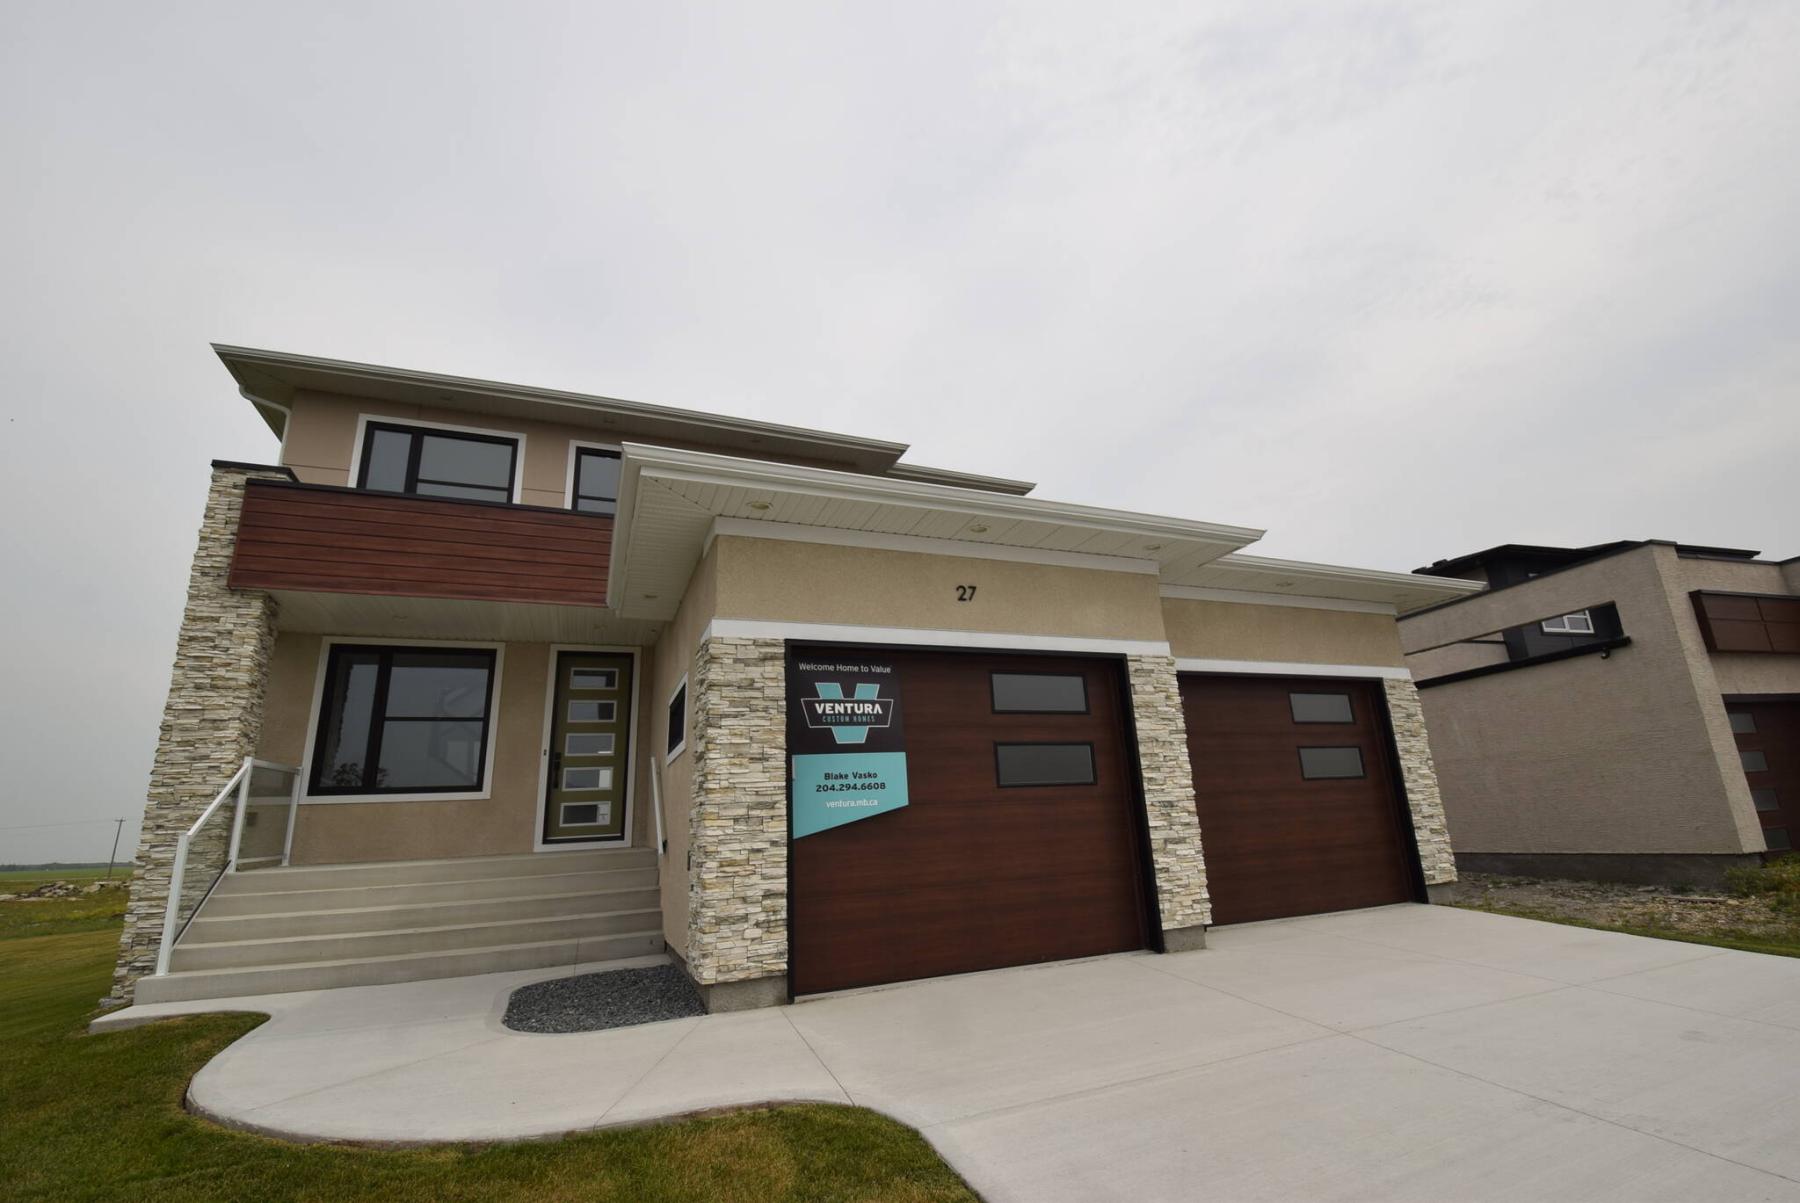  <p>Photos by Todd Lewys / Winnipeg Free Press</p>
                                <p>Family-friendly function abounds in the spacious, well-appointed Monterey, which is situated on a 70-foot-wide lot in LaSalle.</p> 